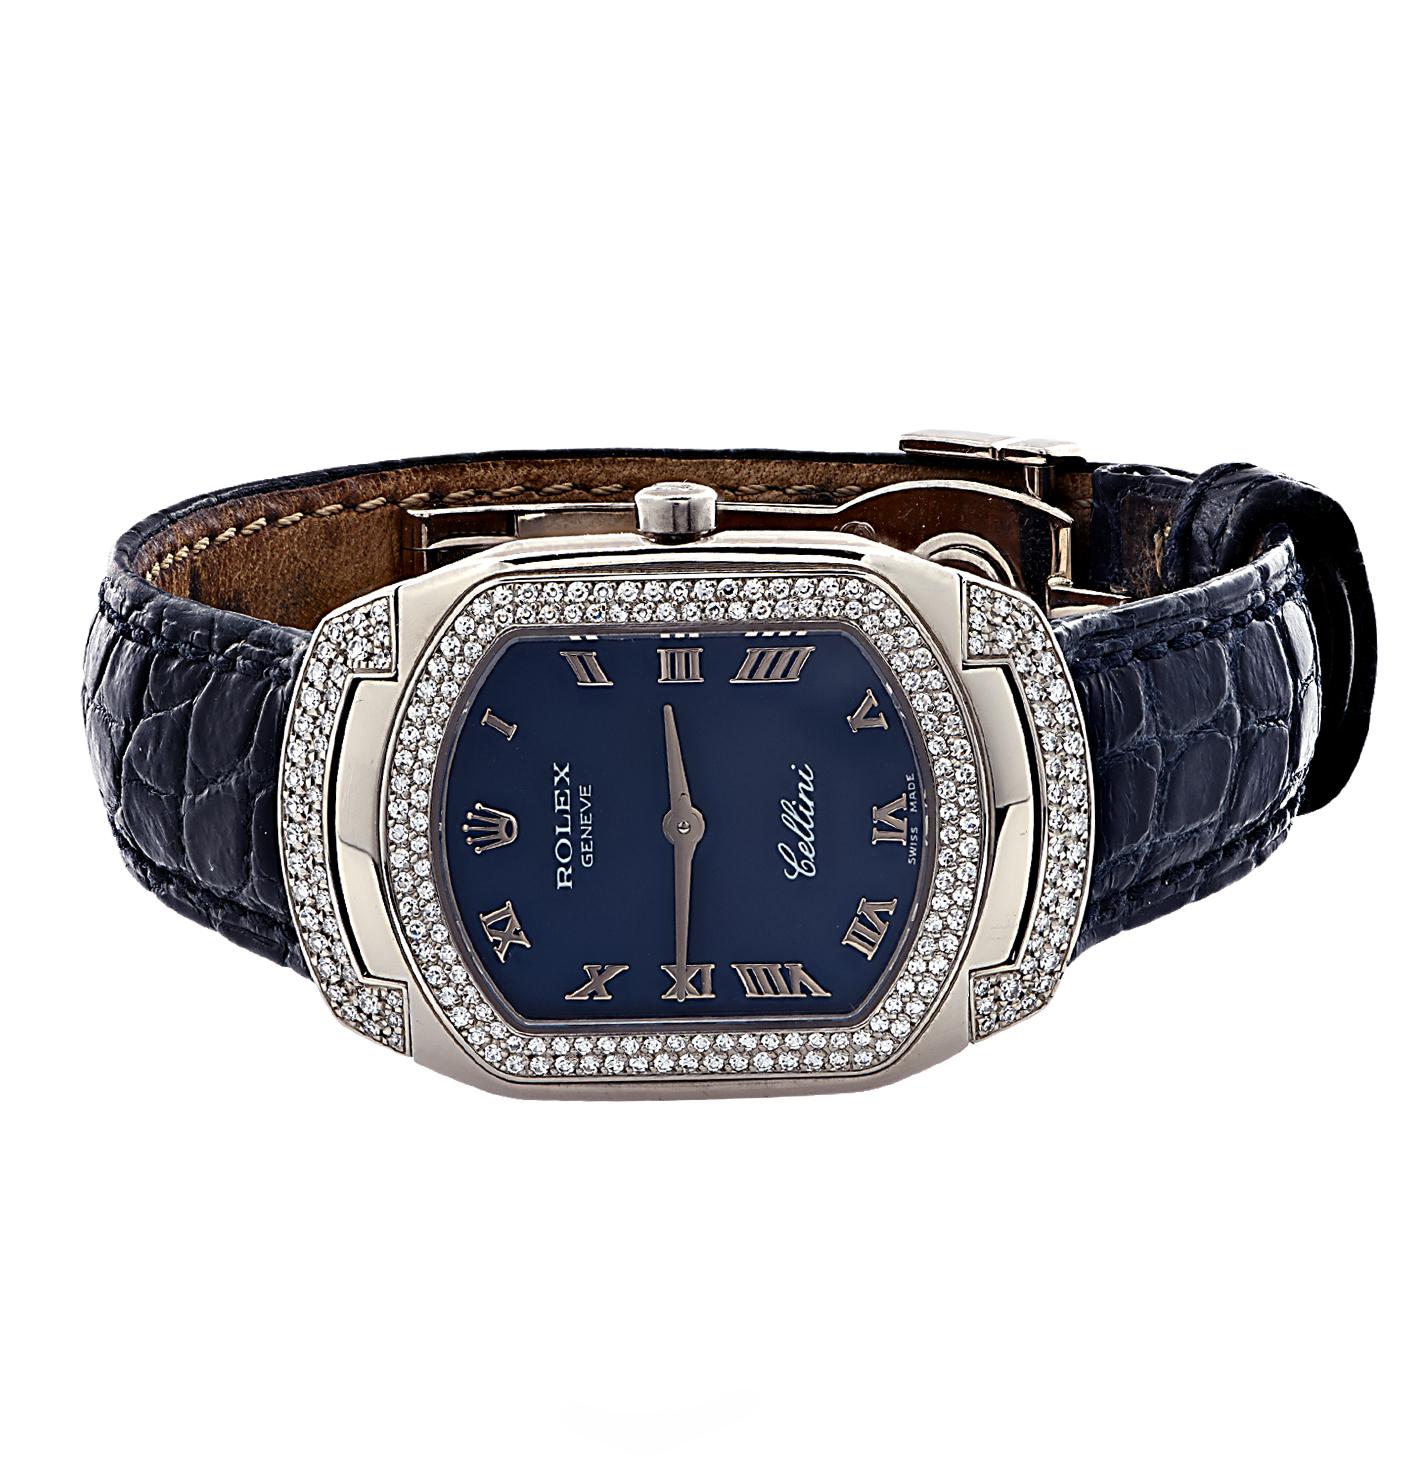 Ladies Rolex Cellissima Cellini wrist watch crafted in 18 karat white gold featuring a blue dial encrusted with 222 single cut diamonds weighing approximately 1.10 carats total, F color, VS clarity. This watch has a quartz movement and a blue